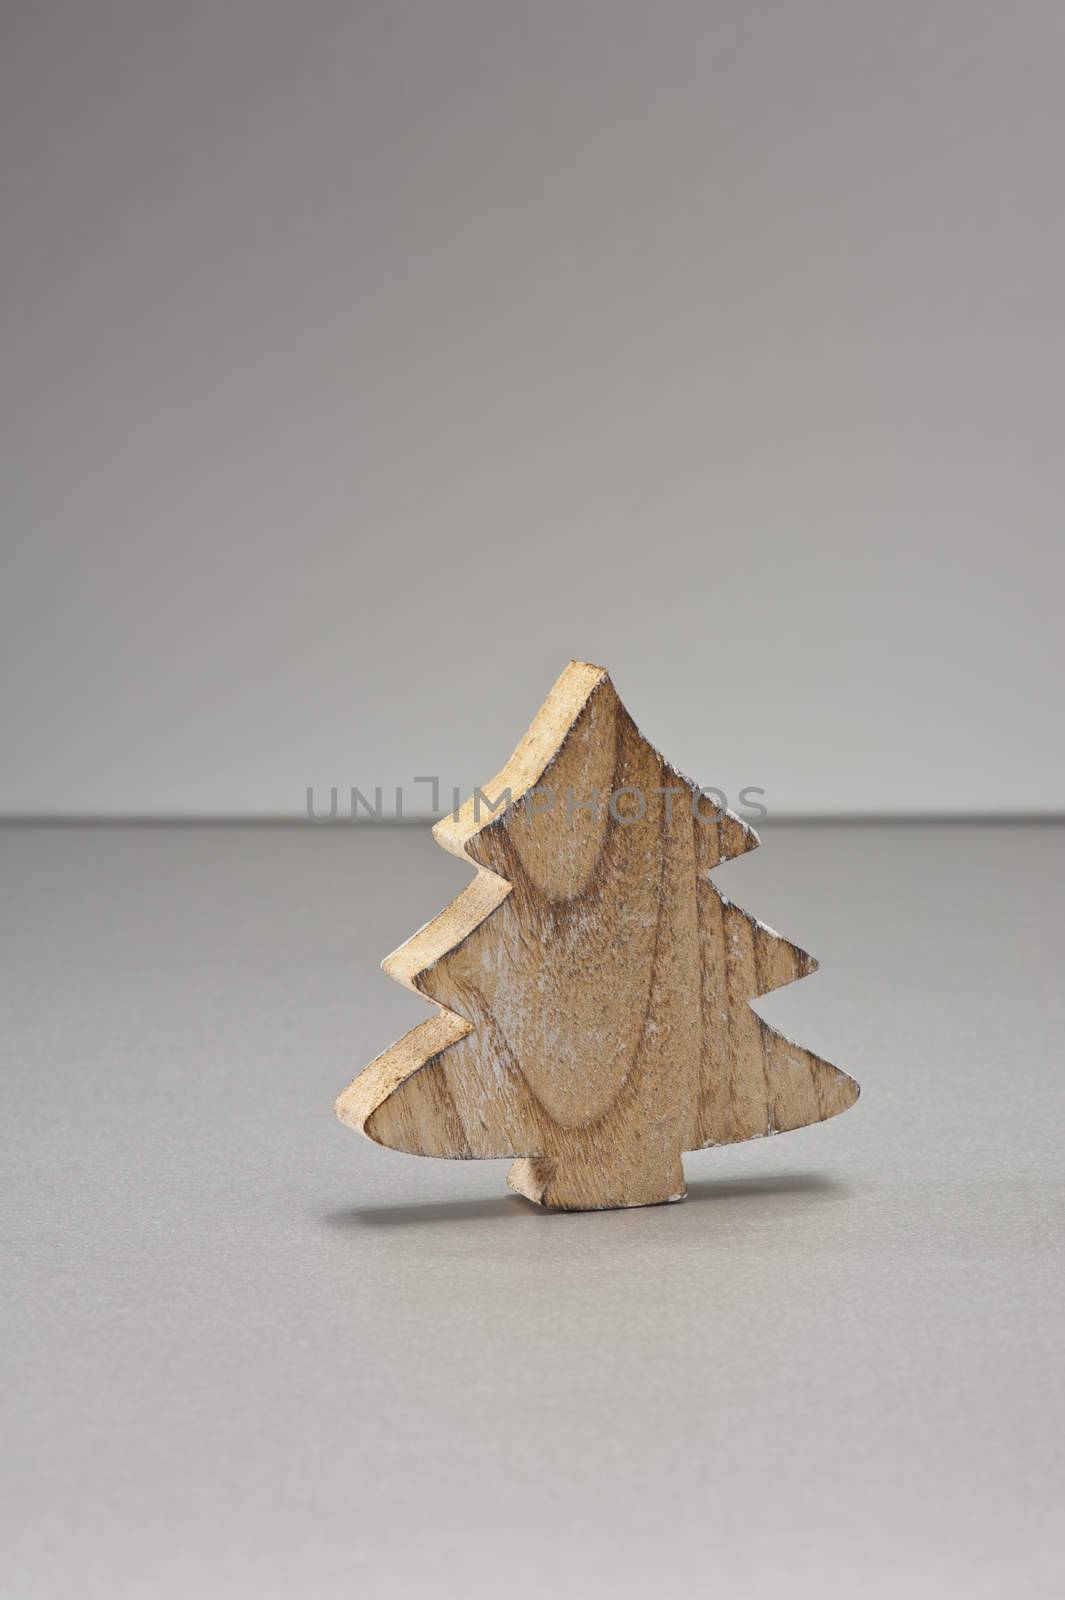 Christmas tree ornament in shape of a Christmas tree